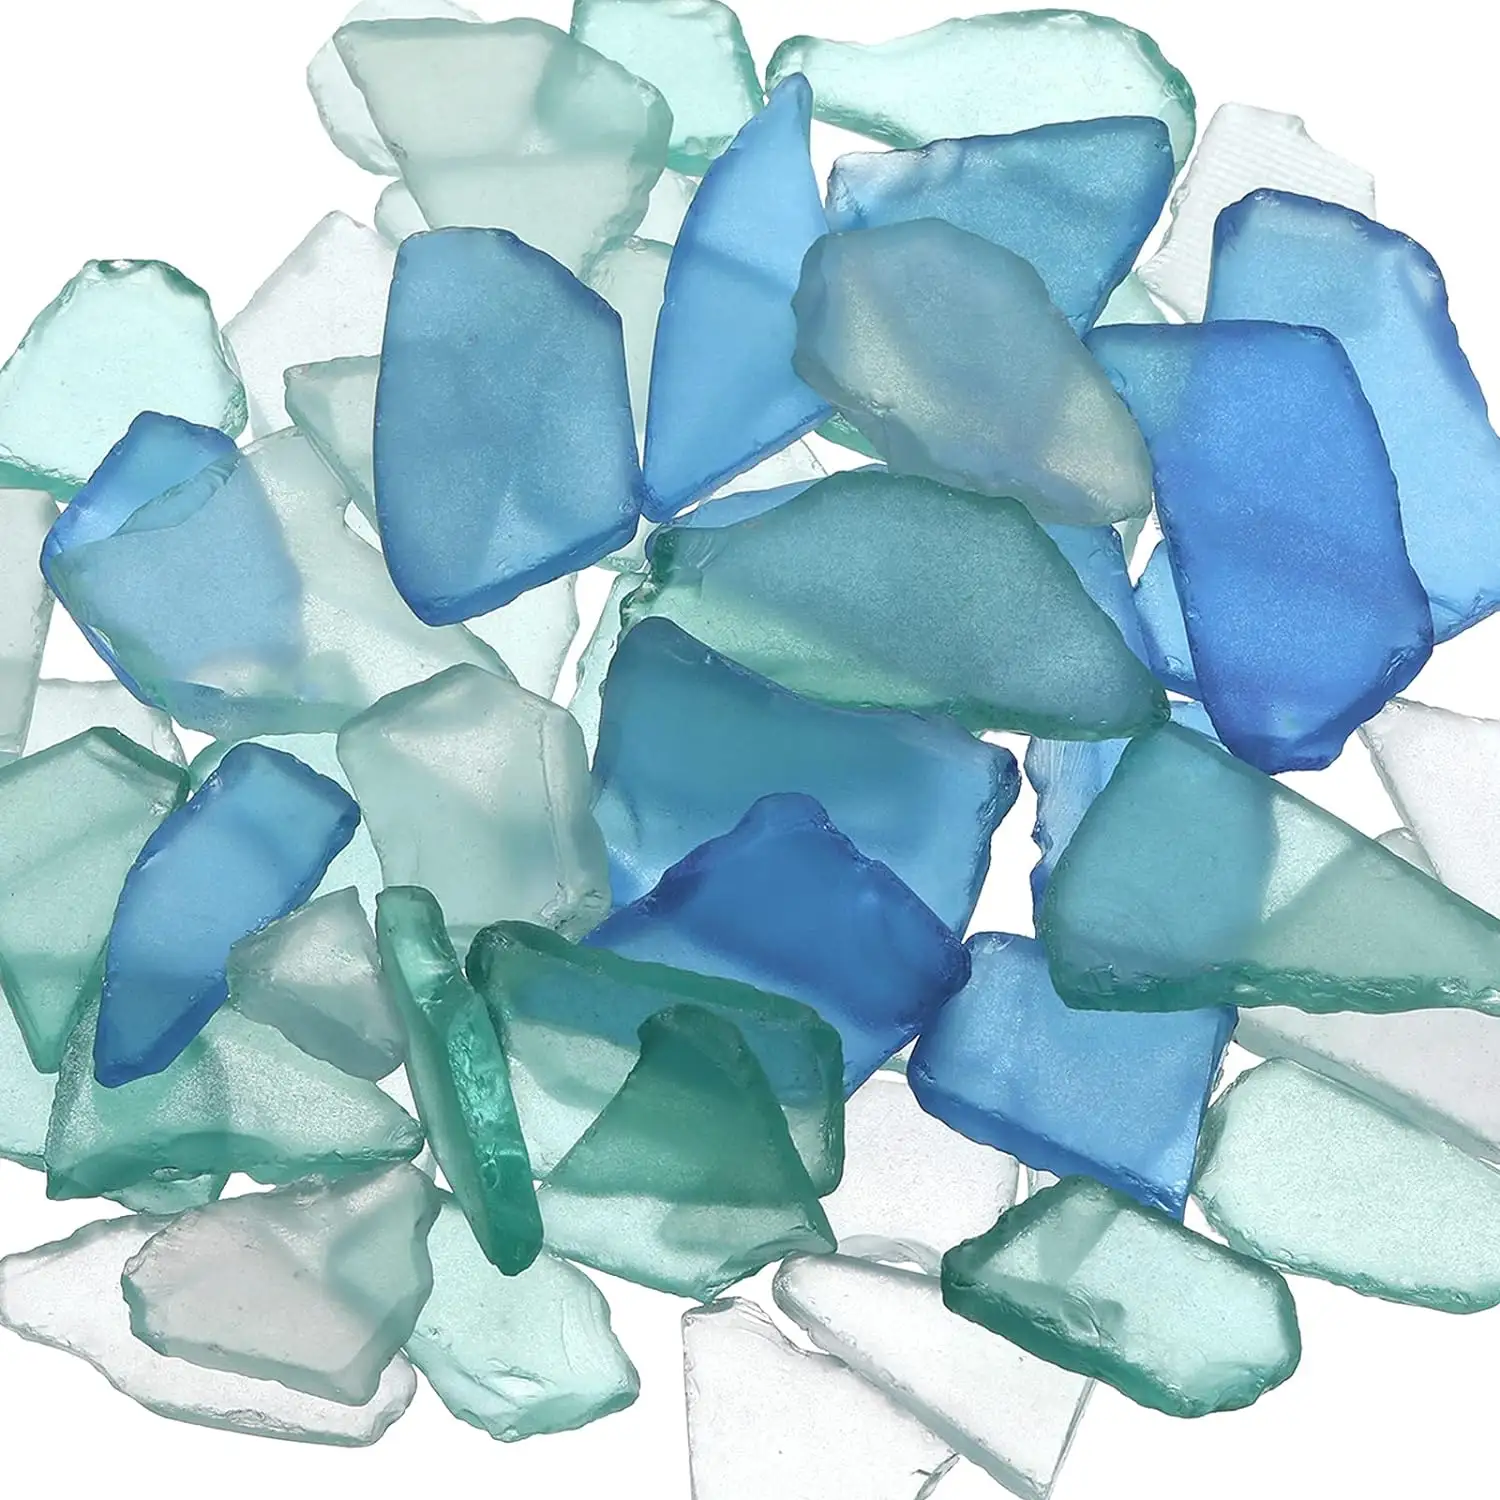 16 Oz Bulk Crushed Sea Glass Pieces for Crafts Weddings Home Decor Ornaments Colored Frosted Flat Glass in Blue White Green